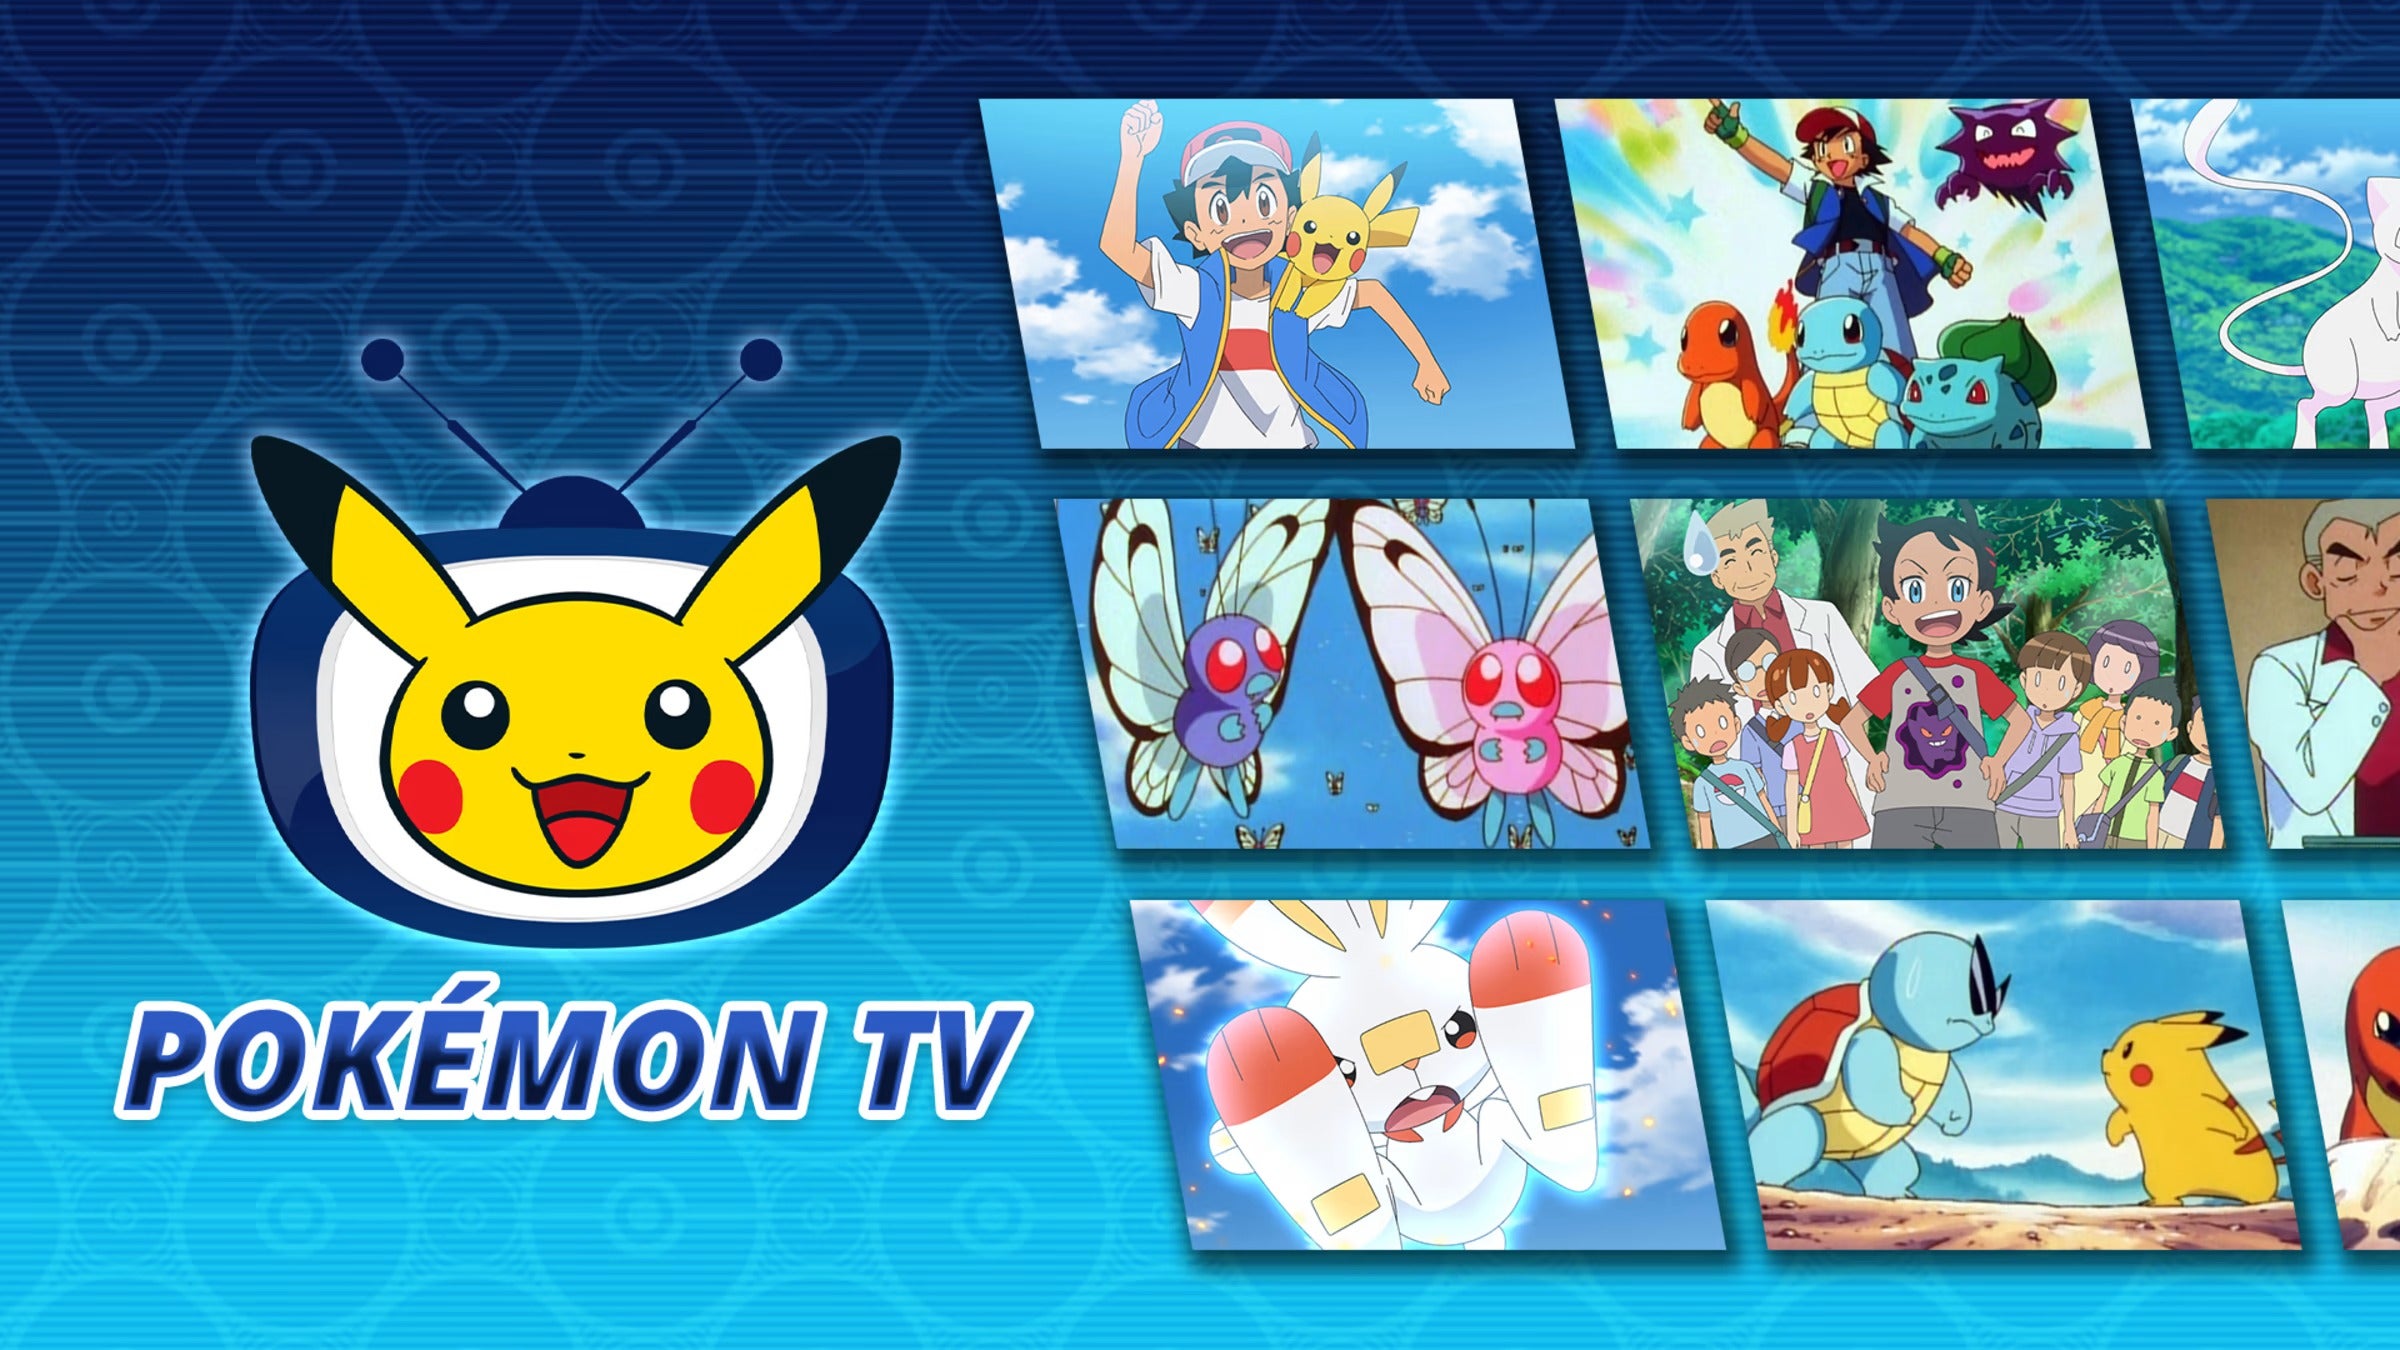 Pokémon TV doesn't have every episode, but it is a free option to watch a chunk of the anime. (Image: The Pokémon Company)